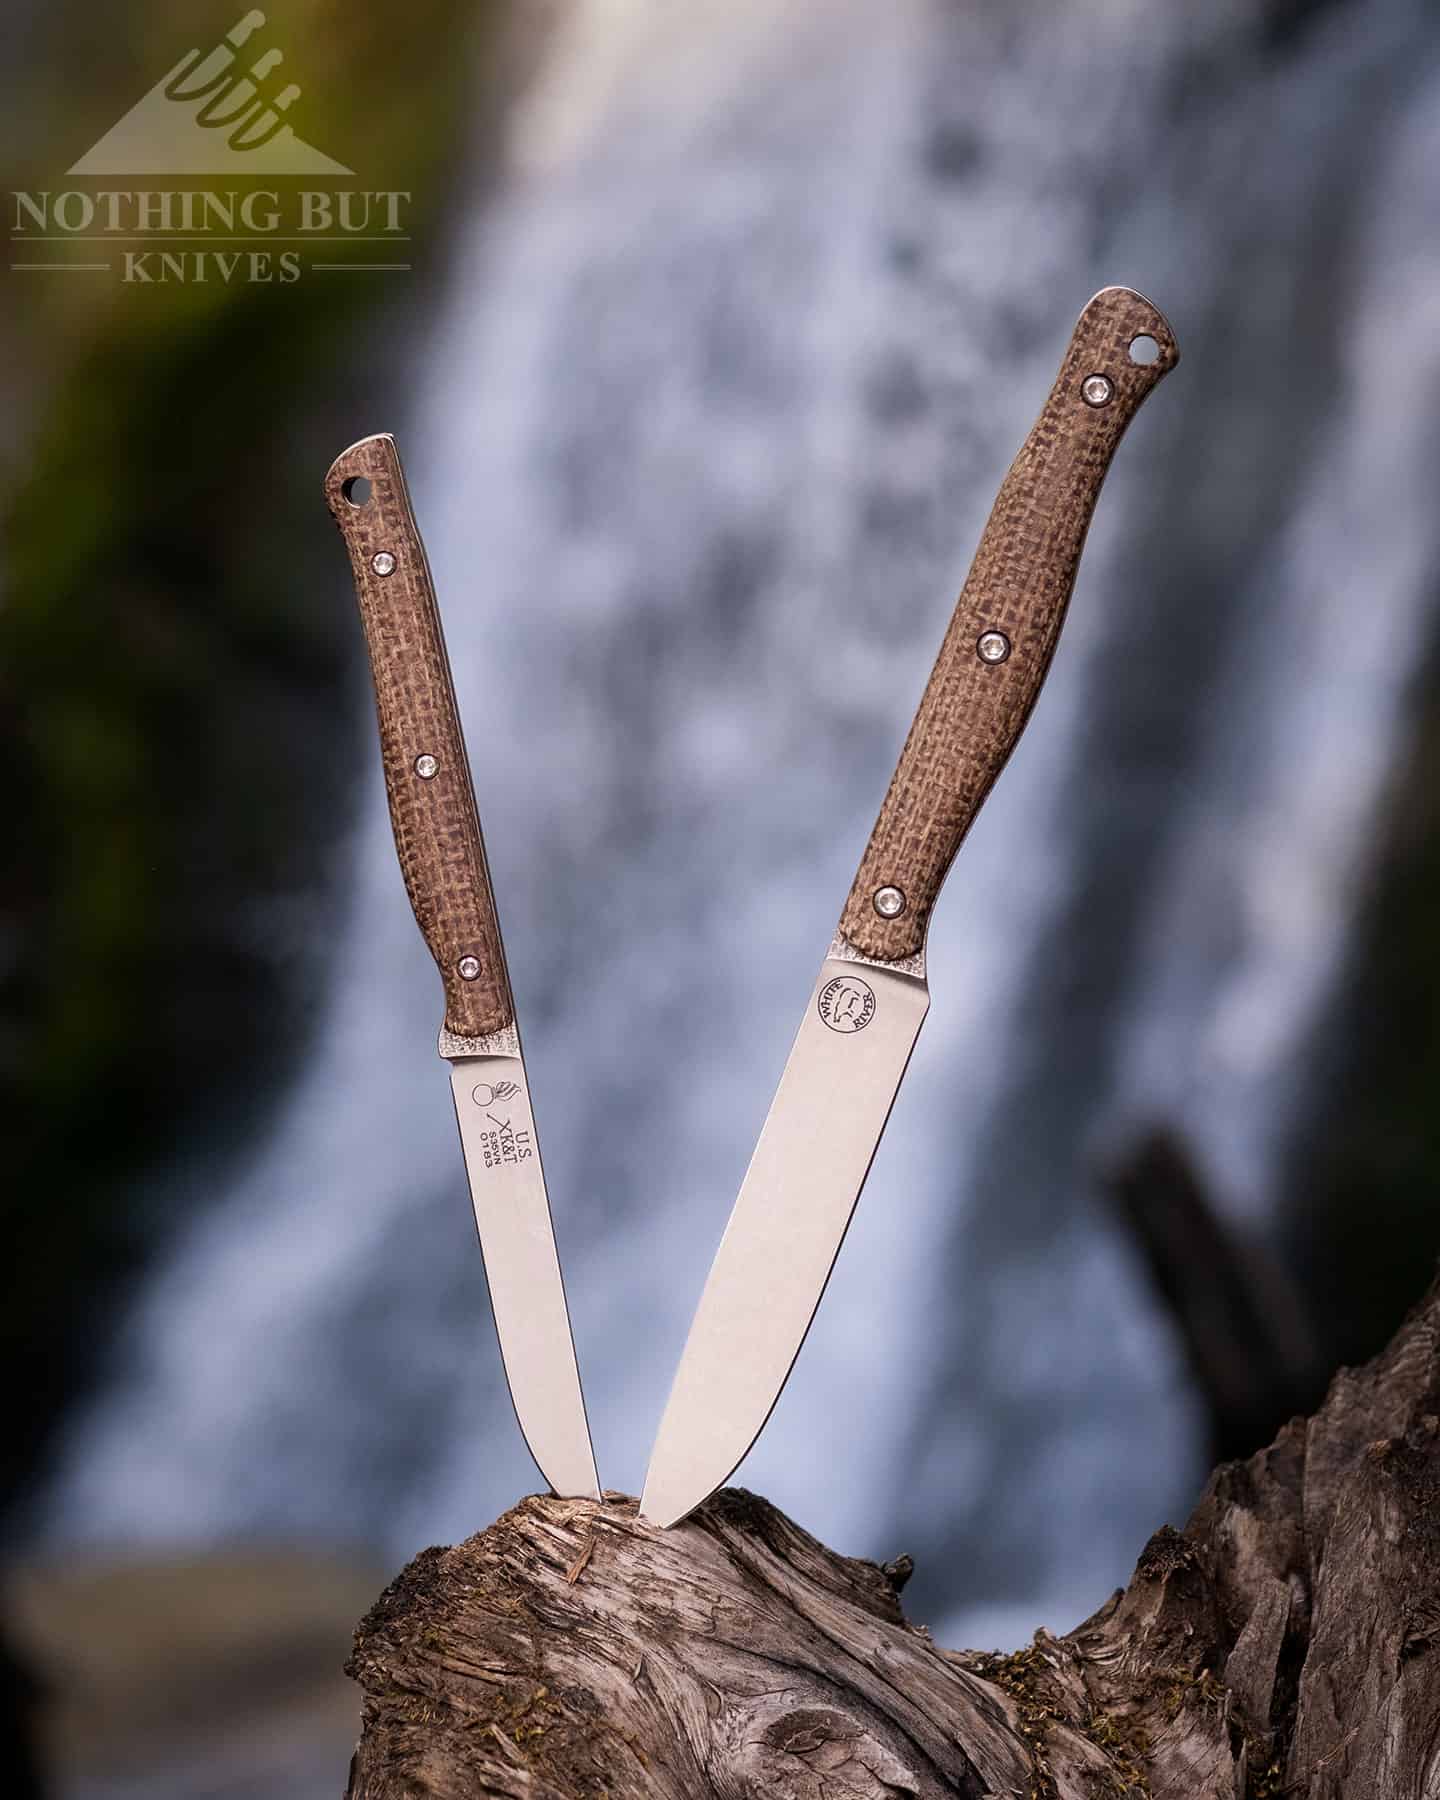 The White River Knives Exodus 3 and 4 knives are great options for anyone who needs a capable fixed blade that is easy to carry over long distances.